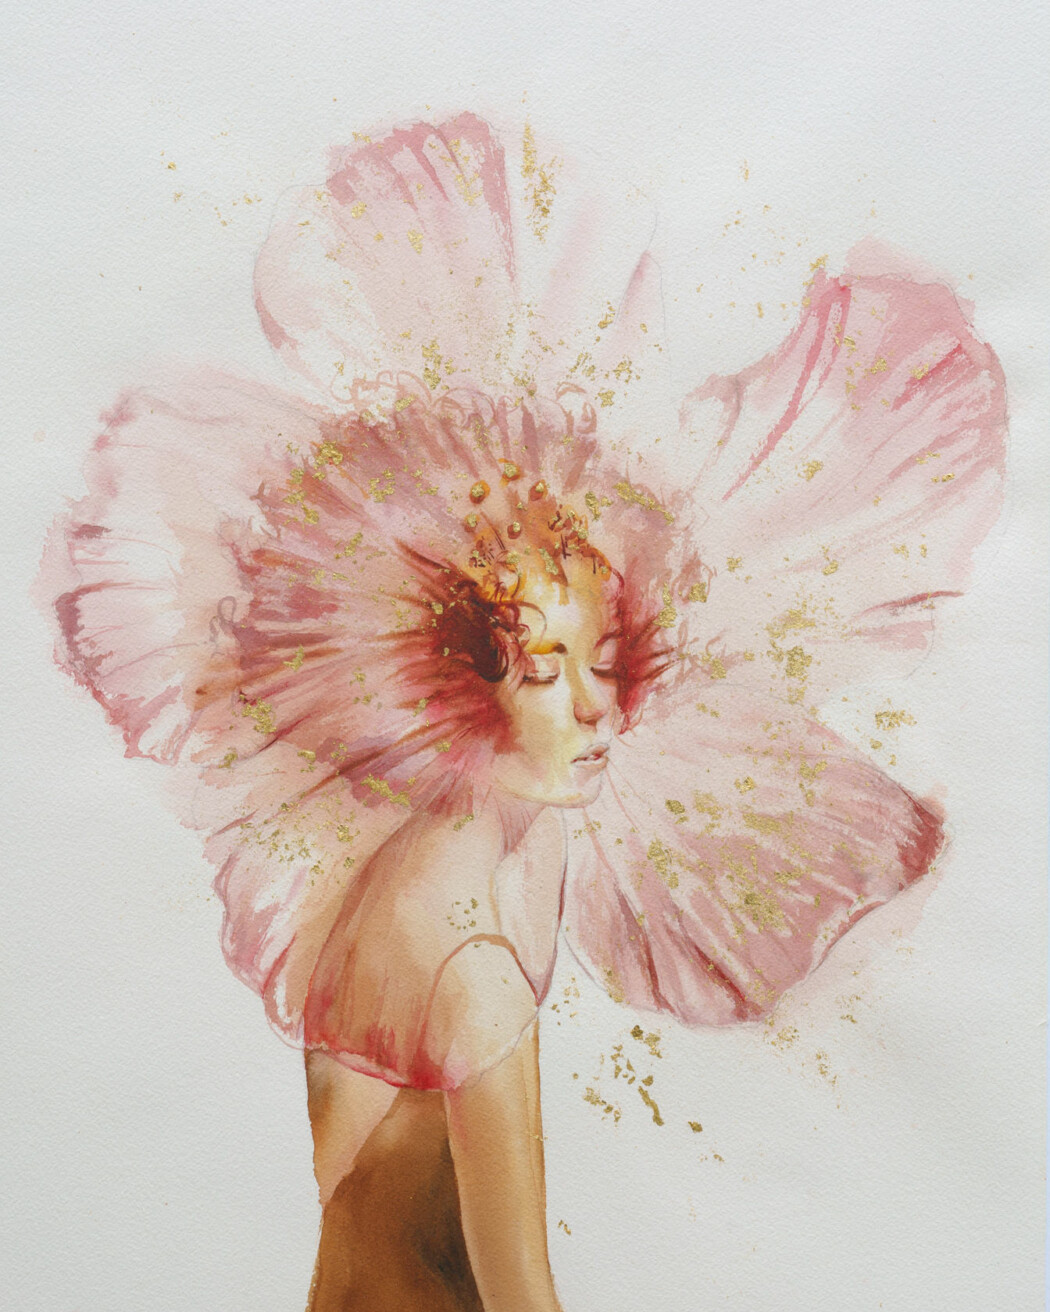 Watercolor painting 'Angelic Cherubic' by Alex Righetto, part of the Radiance Collection, featuring soft pink shades and golden accents in a 22 x 32 inch vertical format.